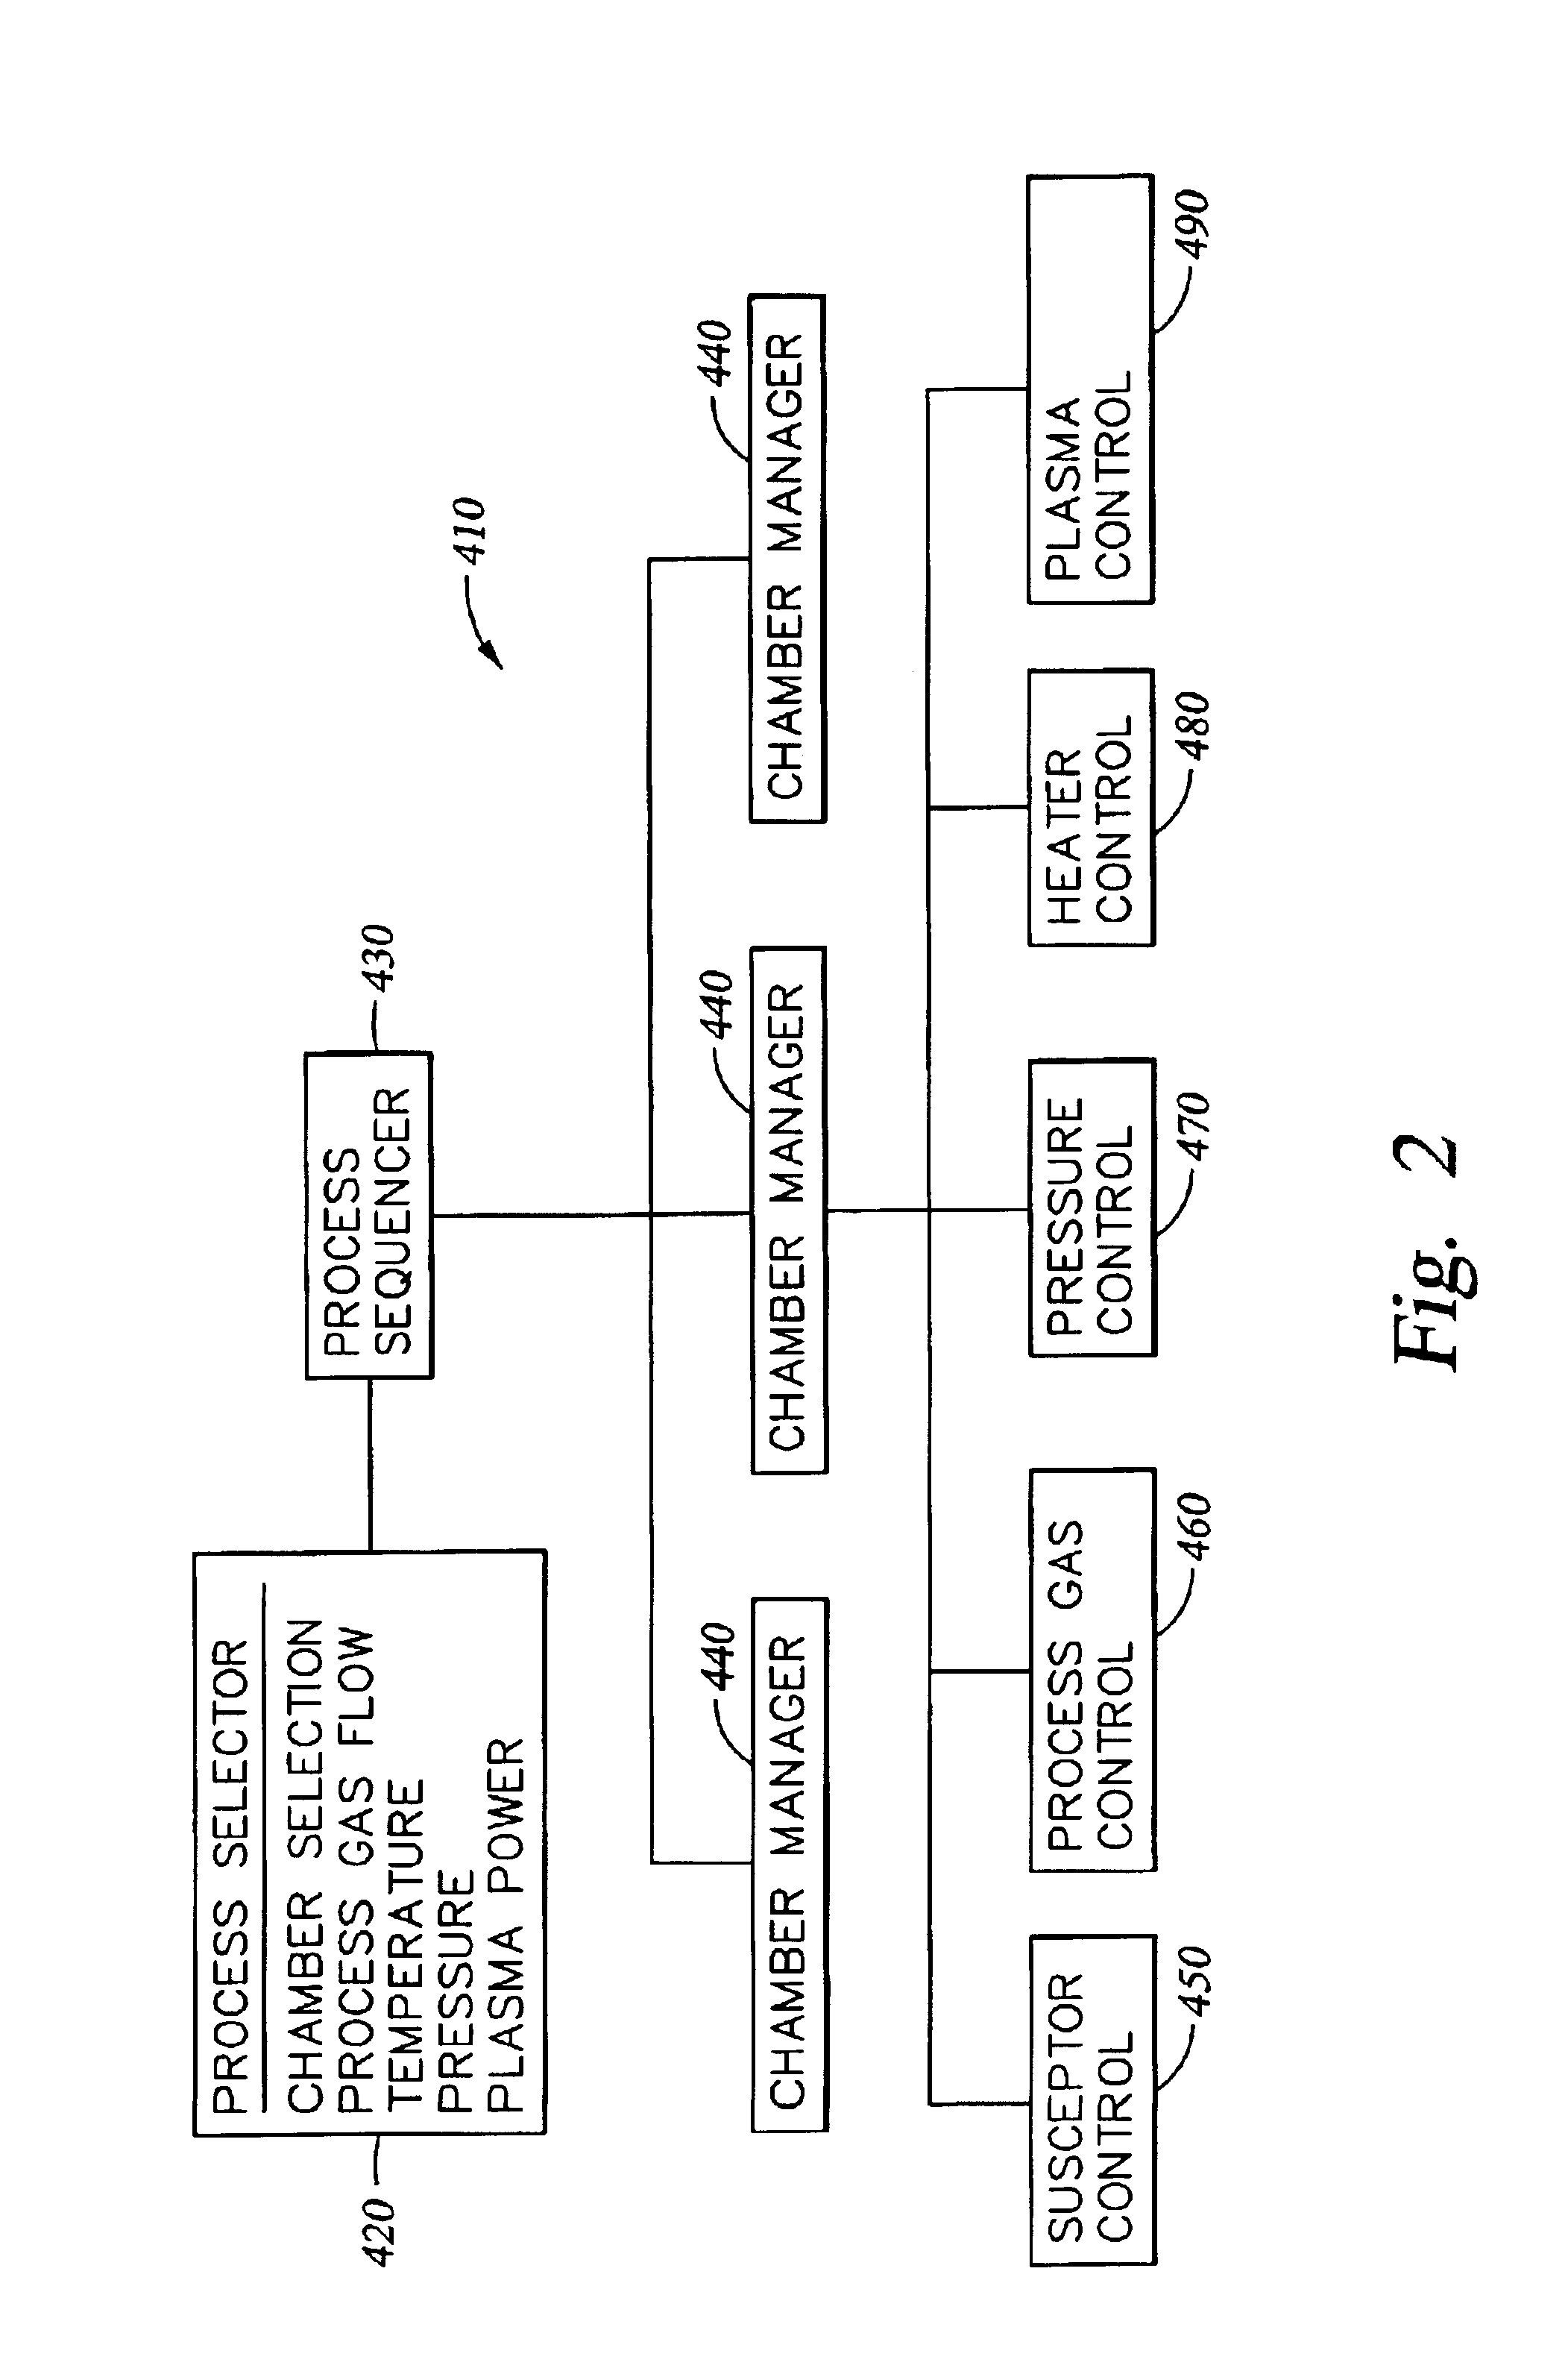 Method for forming ultra low k films using electron beam